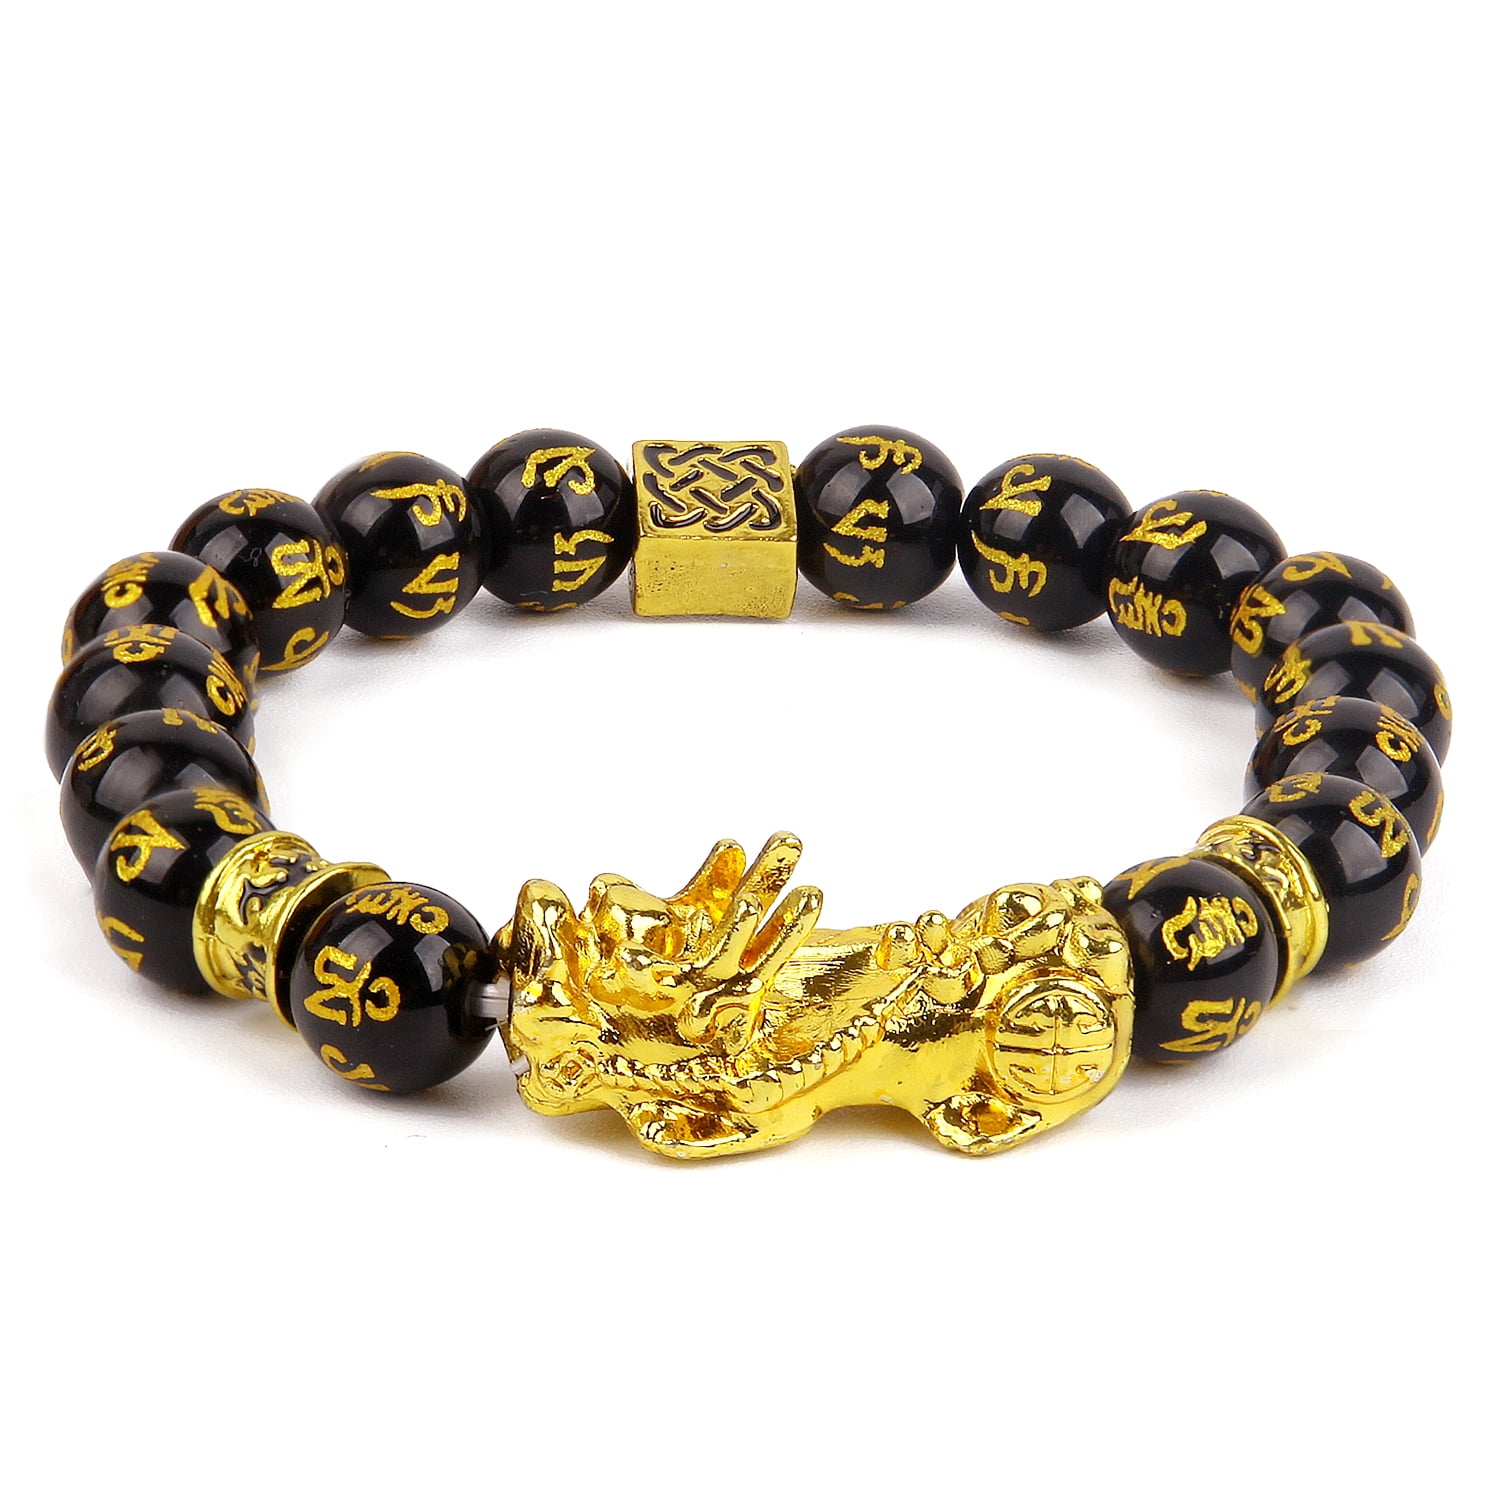 Fengshui Wealth Prosperity Black 10mm Bead Bracelet with Pi Xiu/Pi Yao Attract Wealth and Good Luck